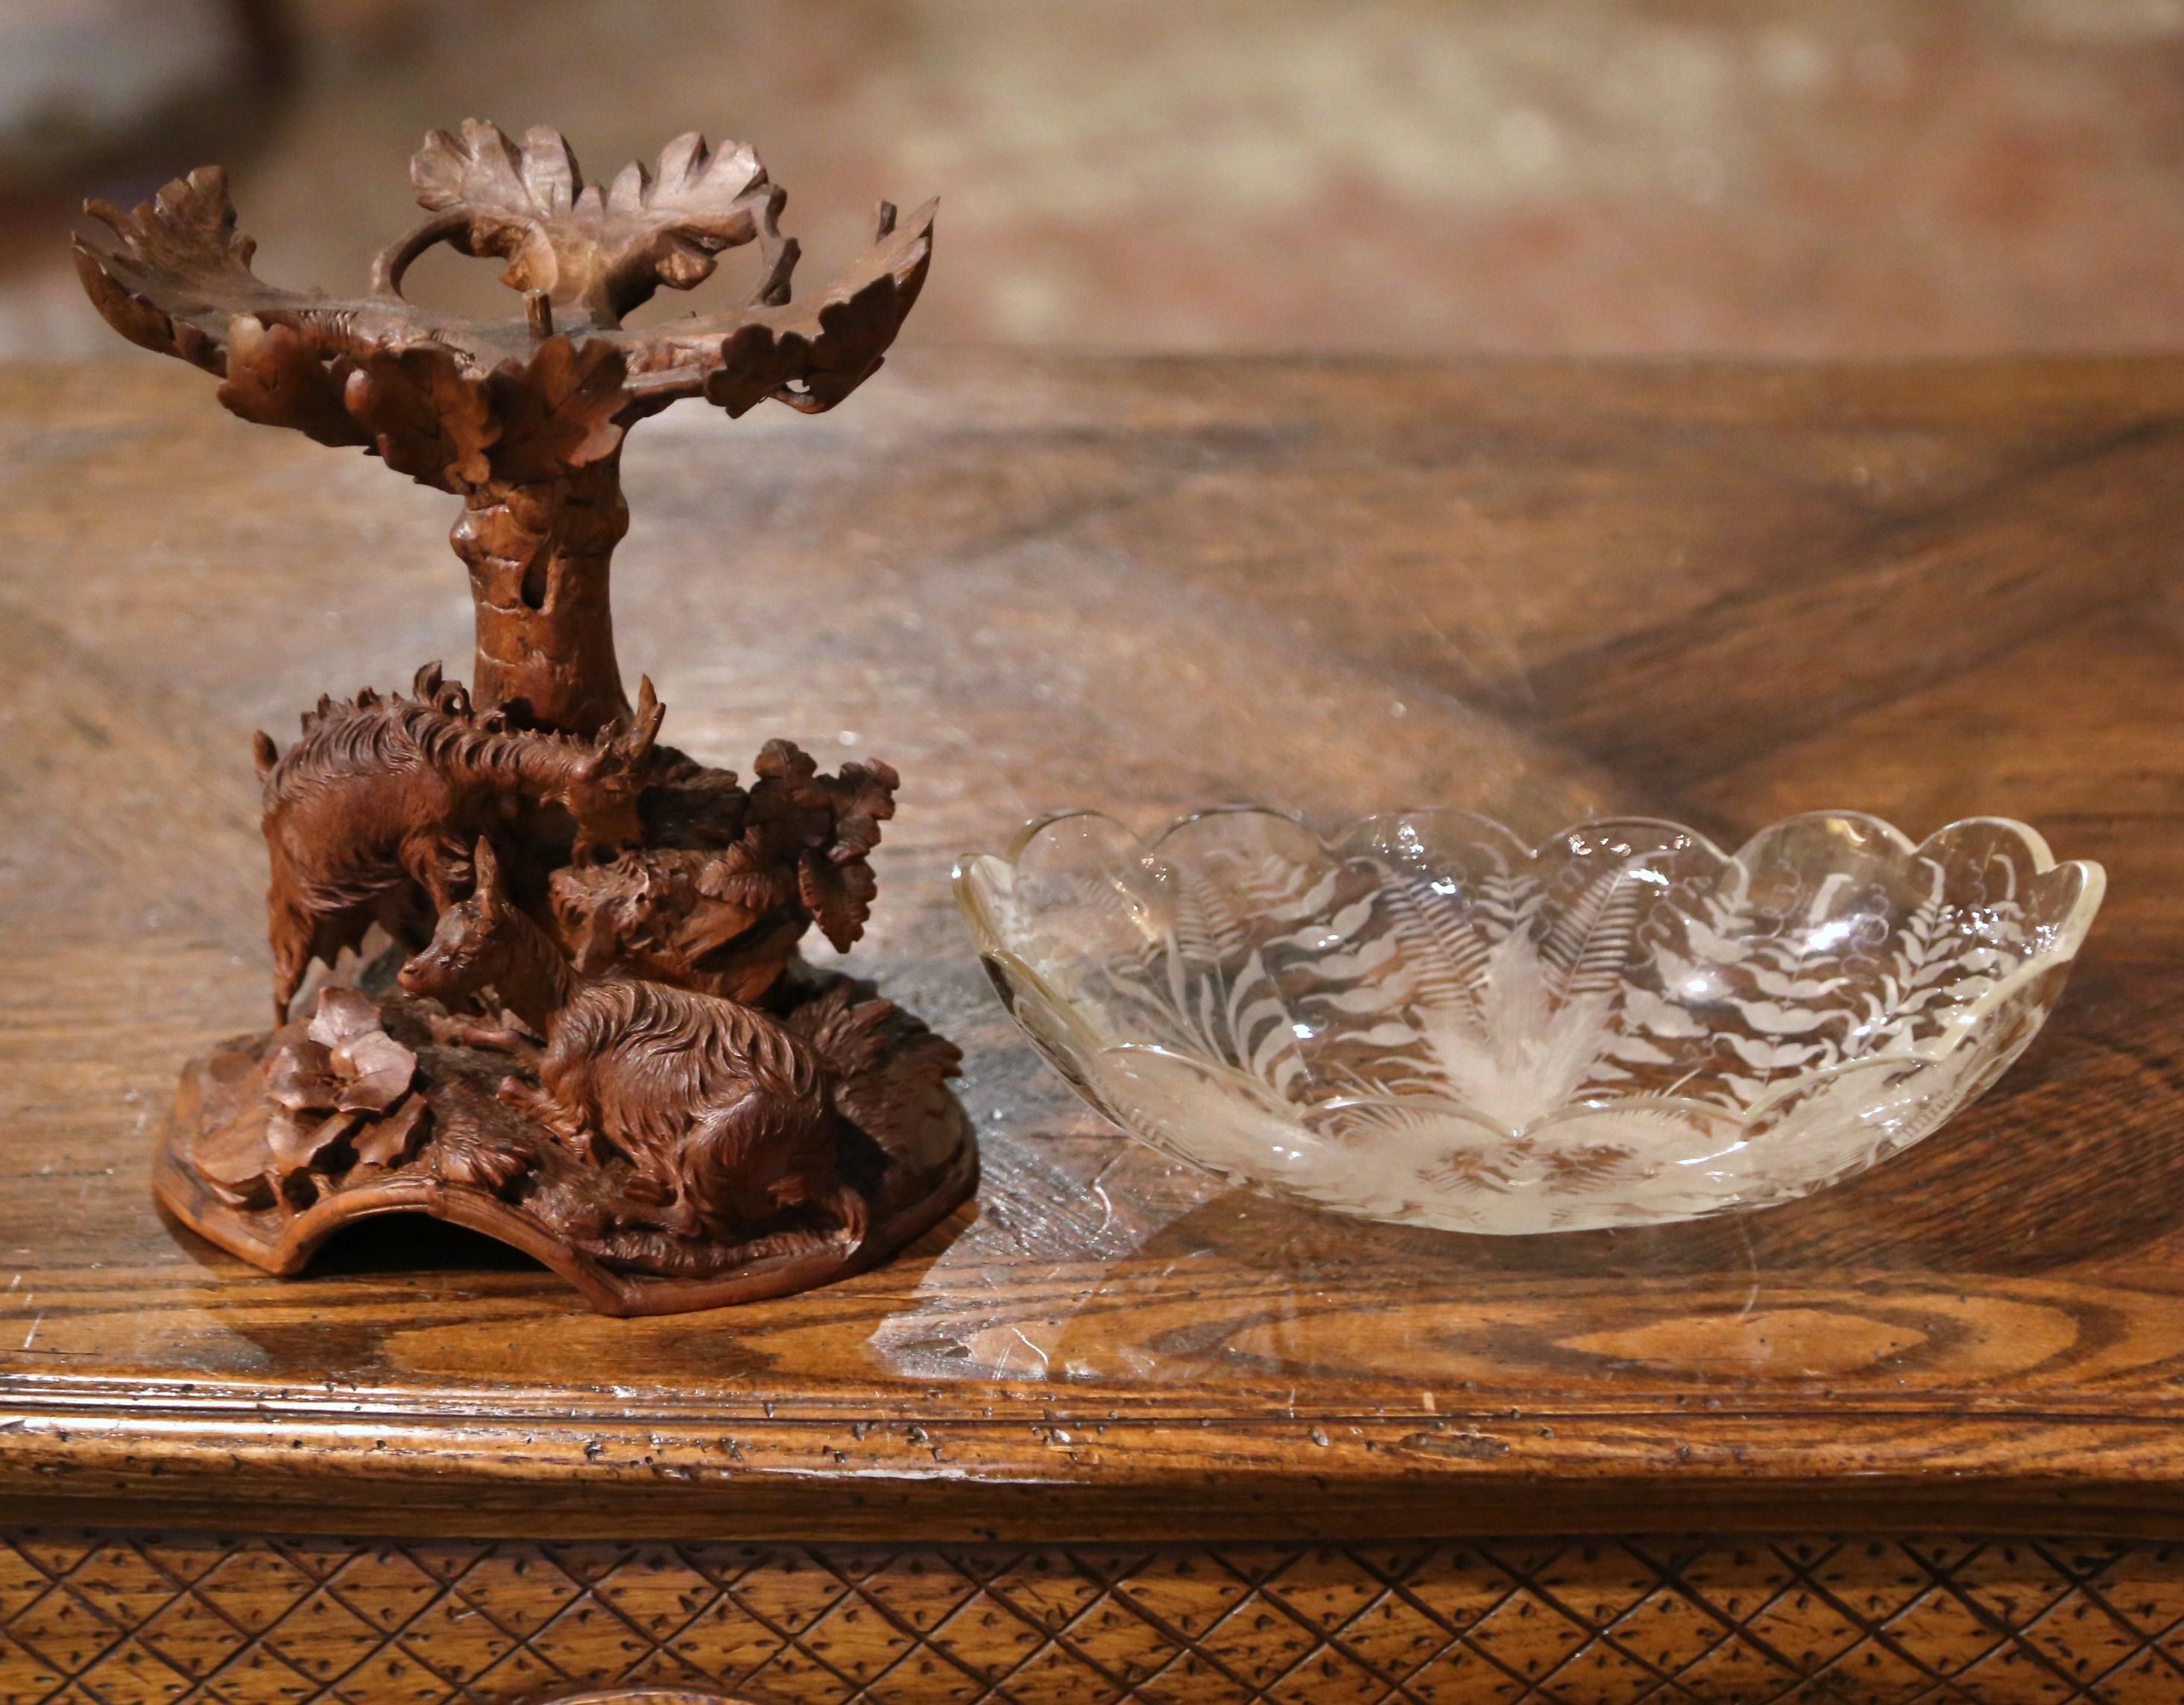 19th Century Black Forest Carved Walnut and Crystal Center Piece with Goat Decor For Sale 4